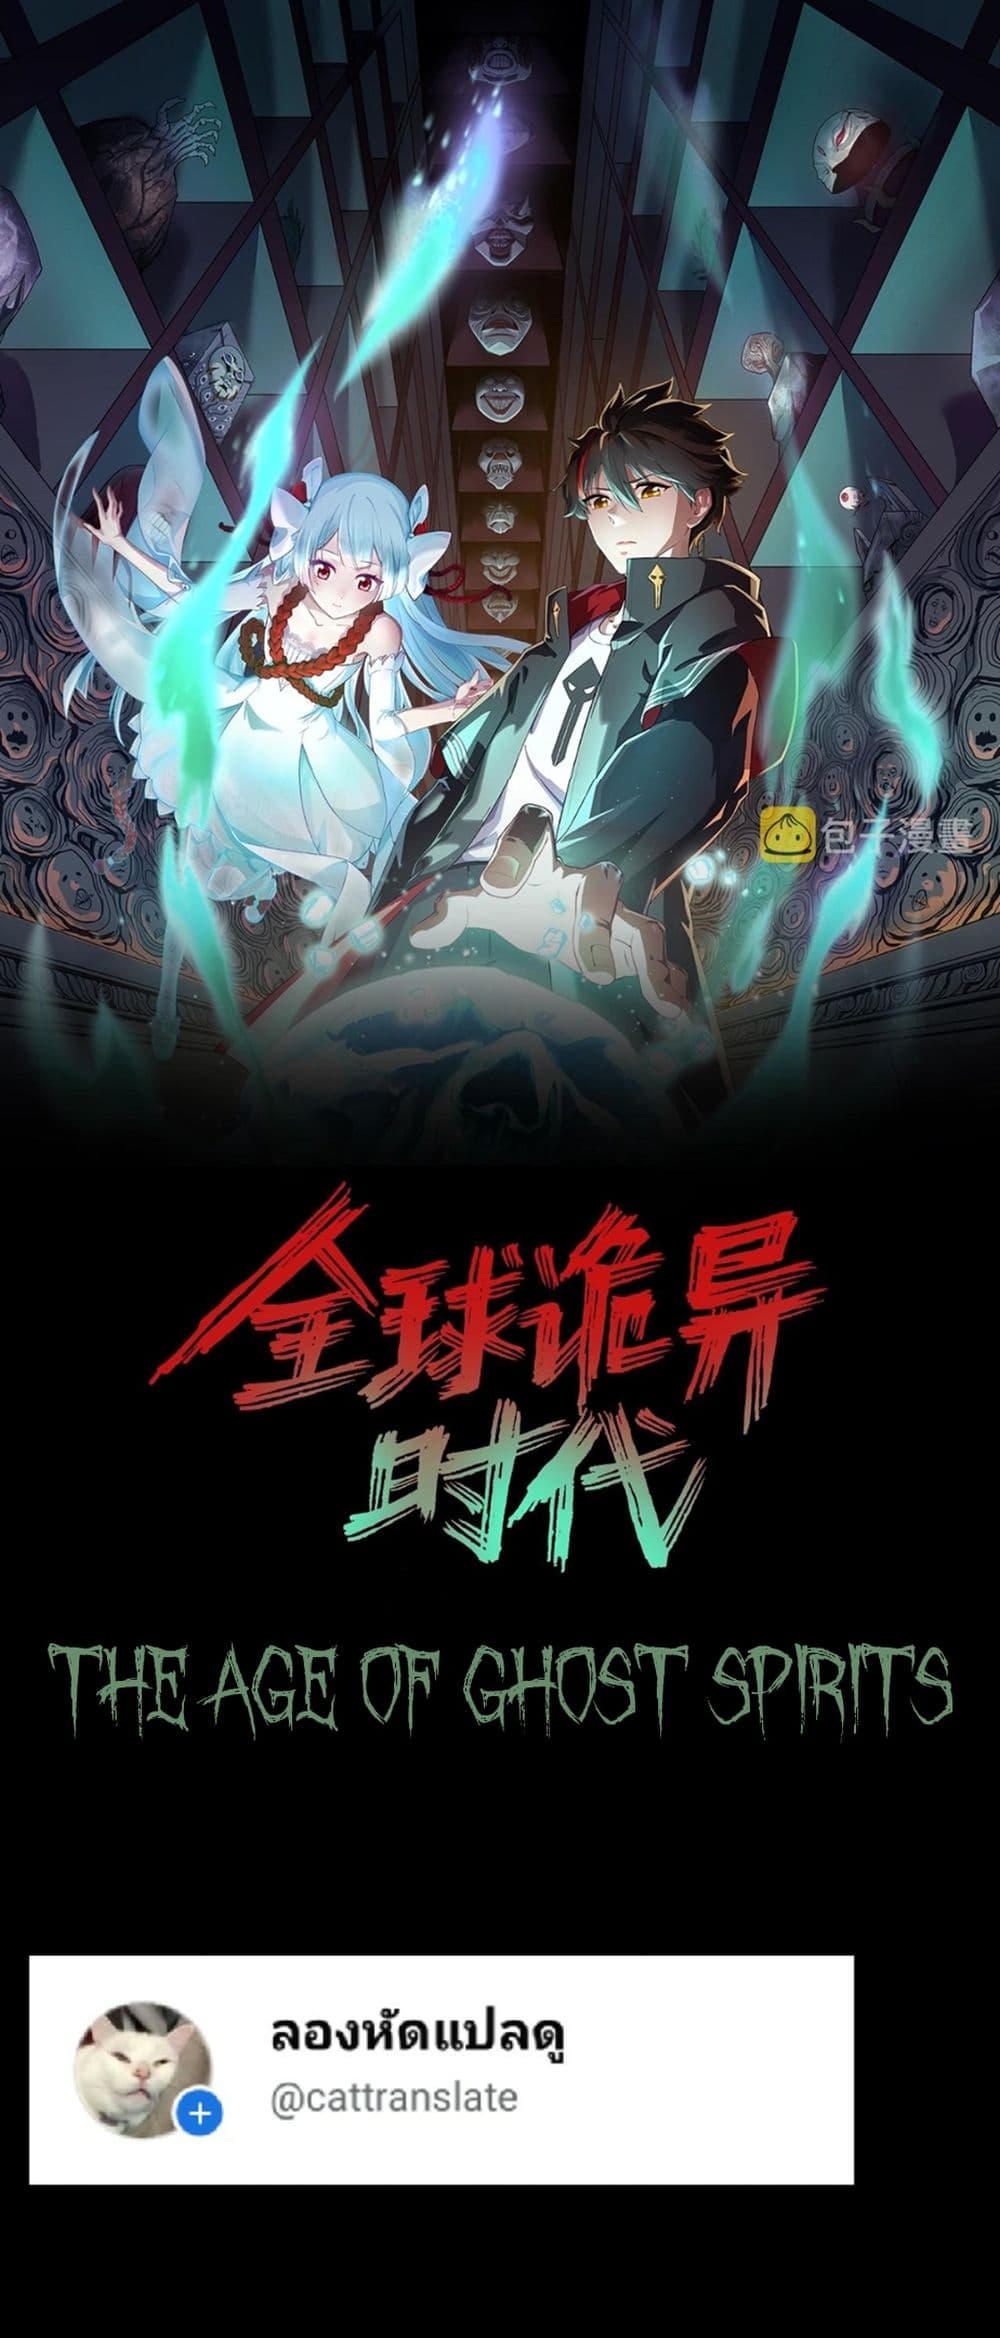 The Age of Ghost Spirits à¸à¸­à¸à¸à¸µà¹ 6 (1)